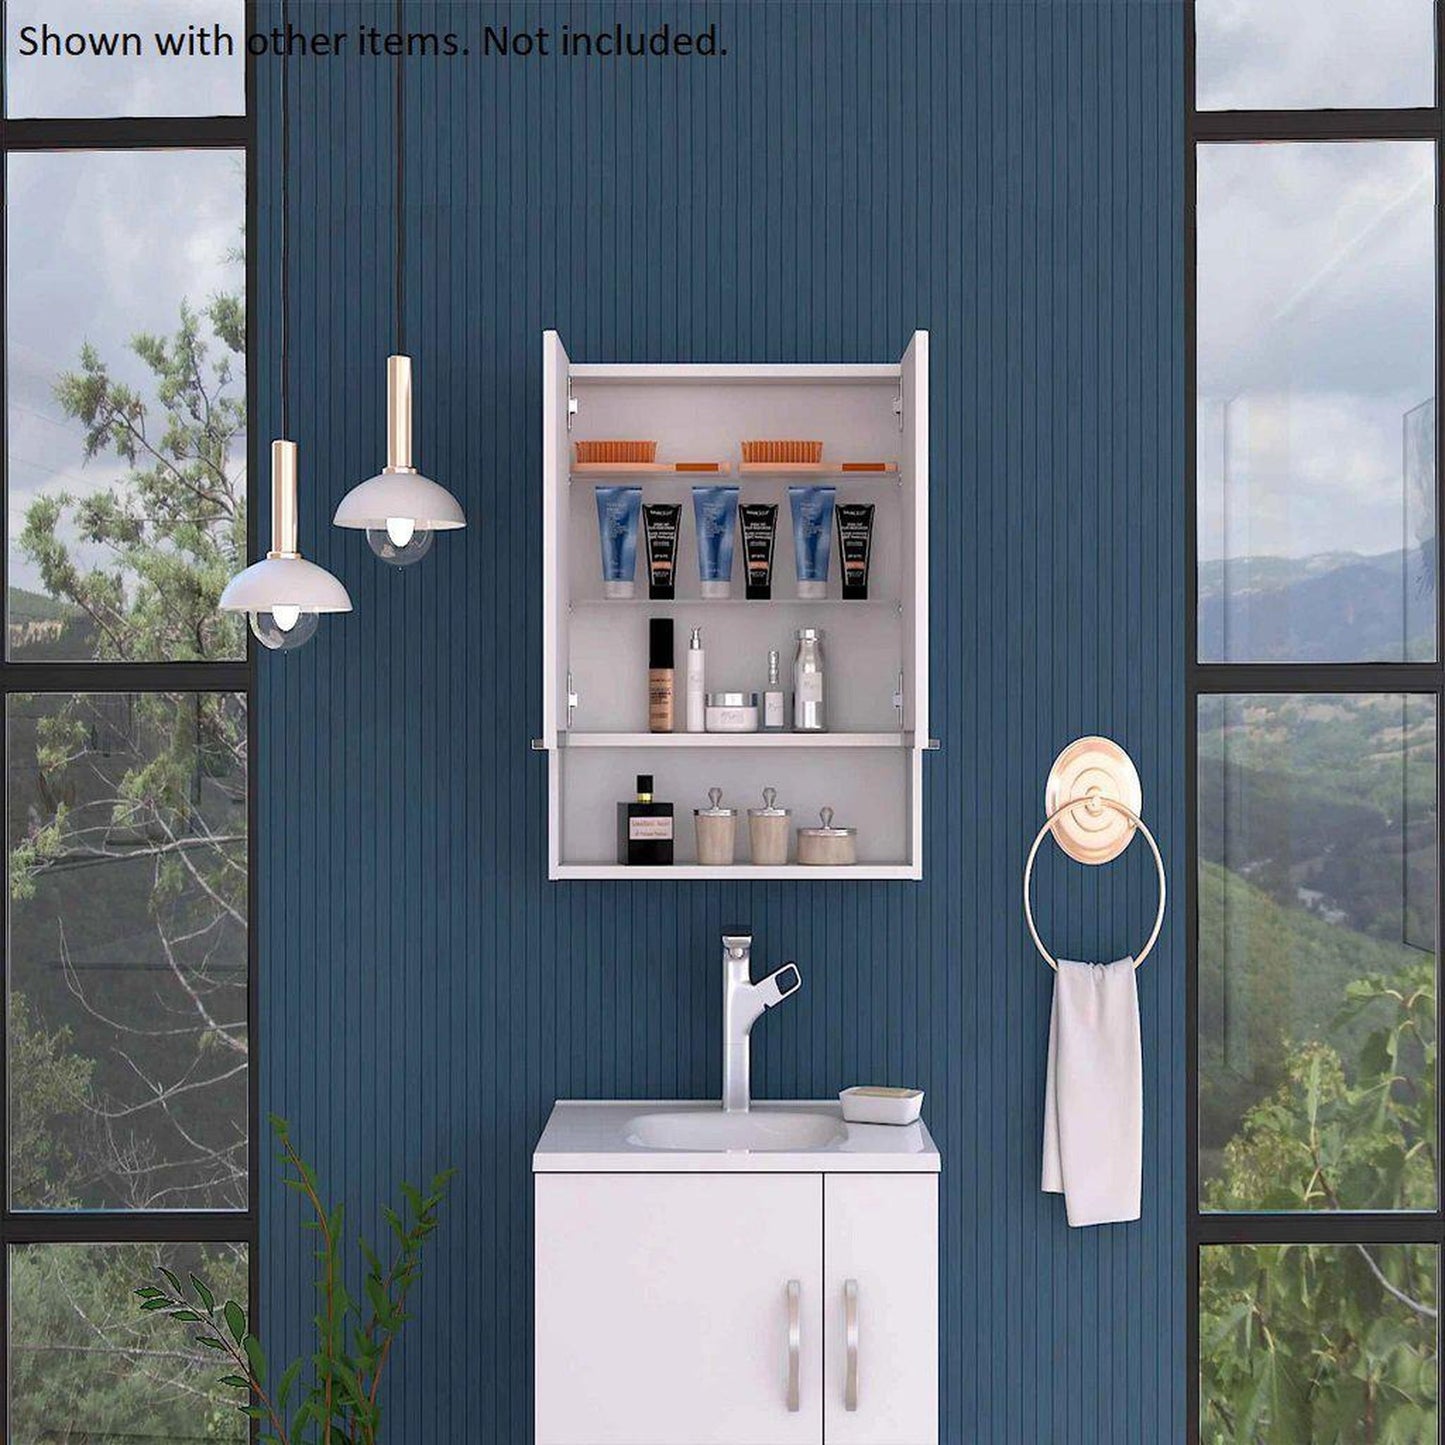 TUHOME Jaspe 24 x 25 White Wall-Mounted Mirror Medicine Cabinet With – US  Bath Store